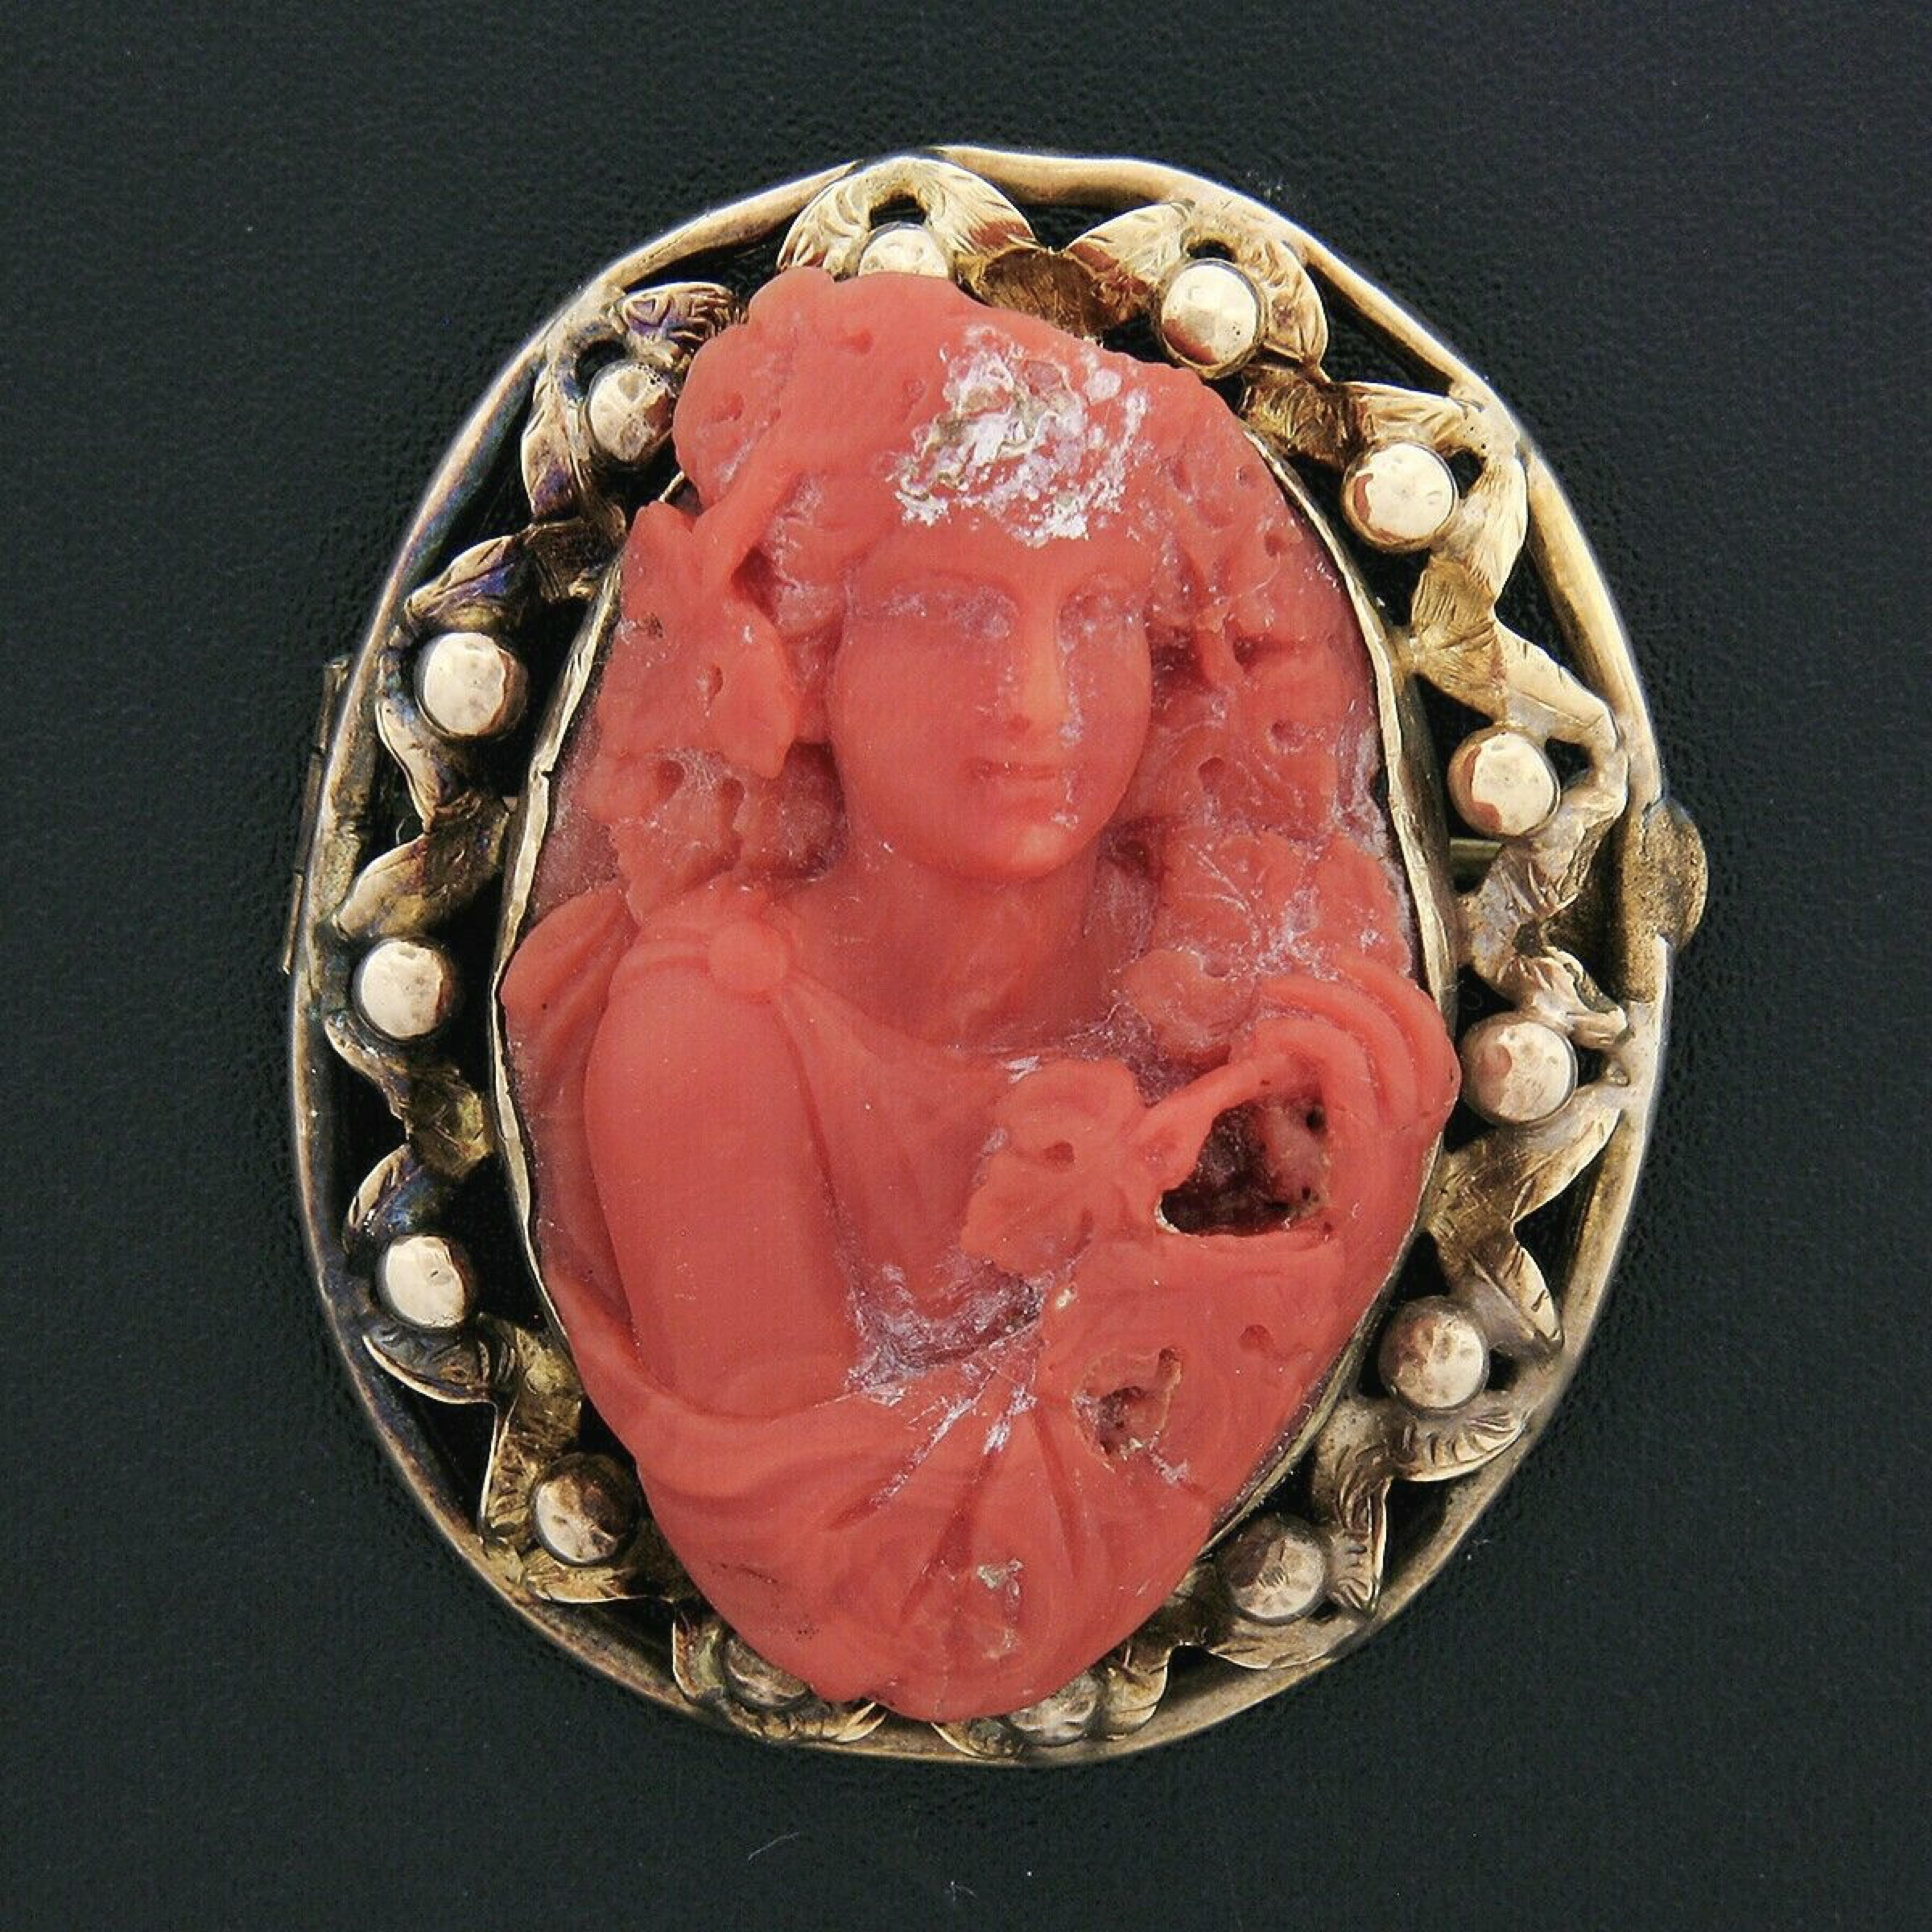 This large handmade antique brooch was crafted in solid 14k yellow gold during the Victorian era. It features a GIA certified, natural coral stone set into an open work and hand etched floral themed frame. The coral is a rich orange-red color and is